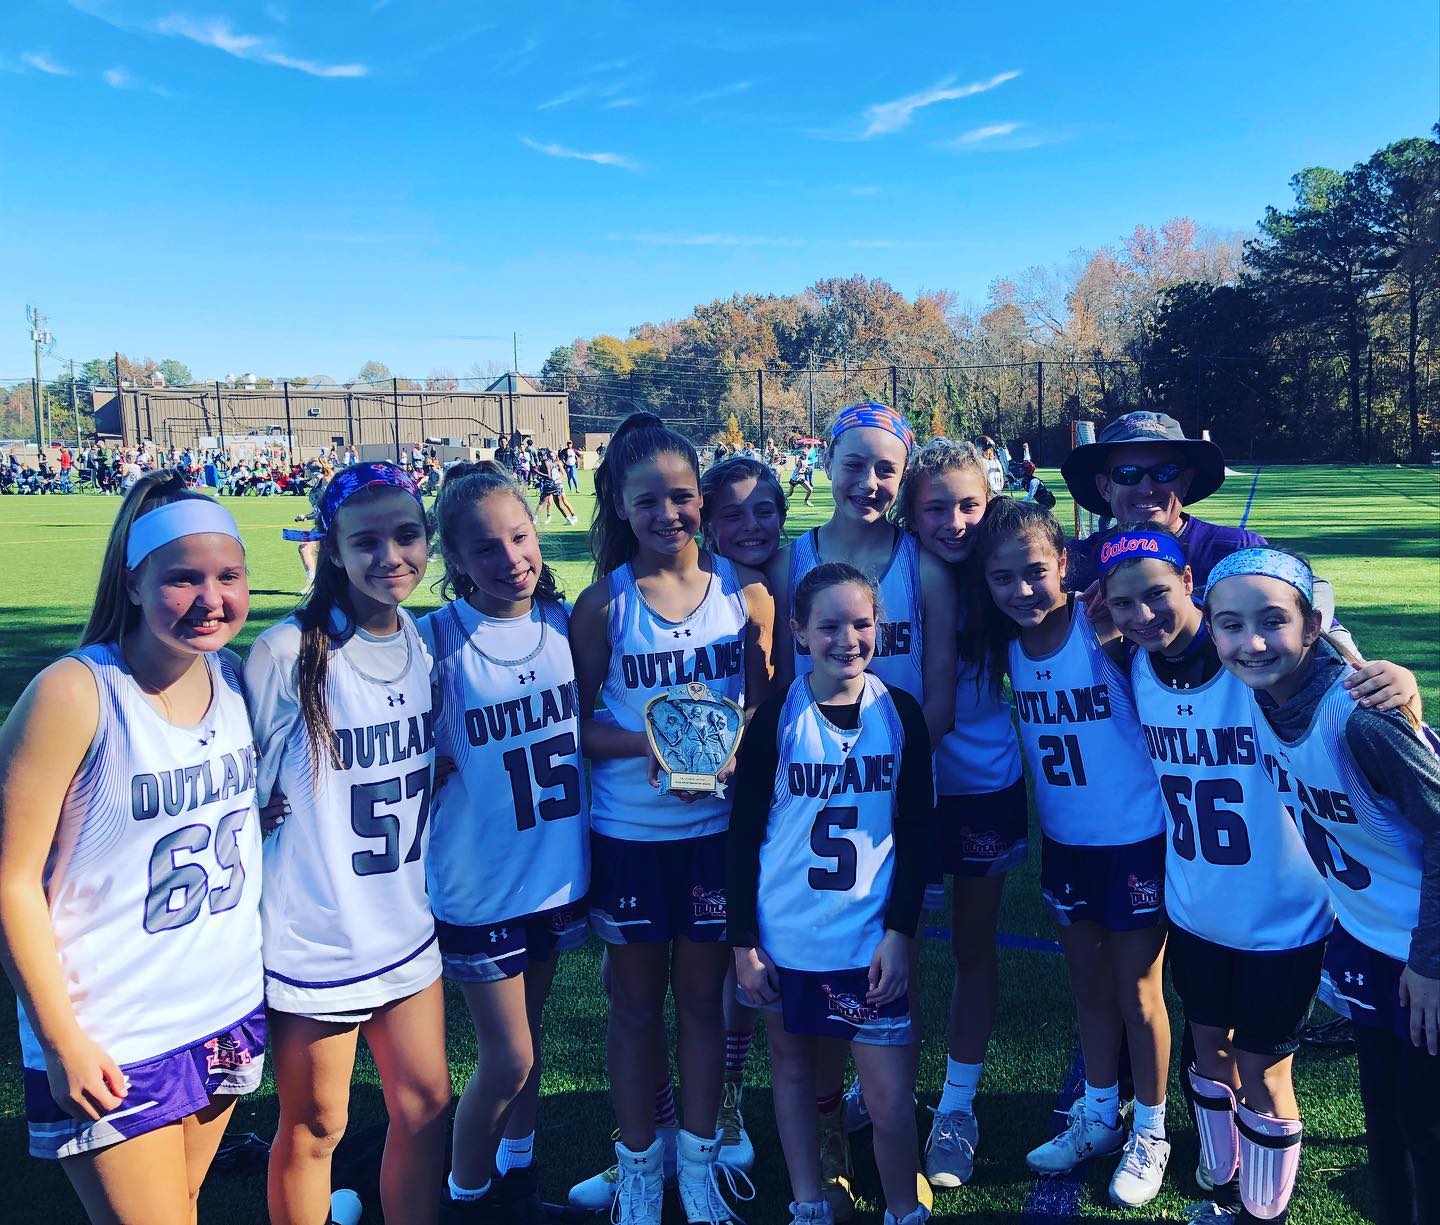 Outlaws 2025 receive Sportsmanship Award at Fall Classic Tournament